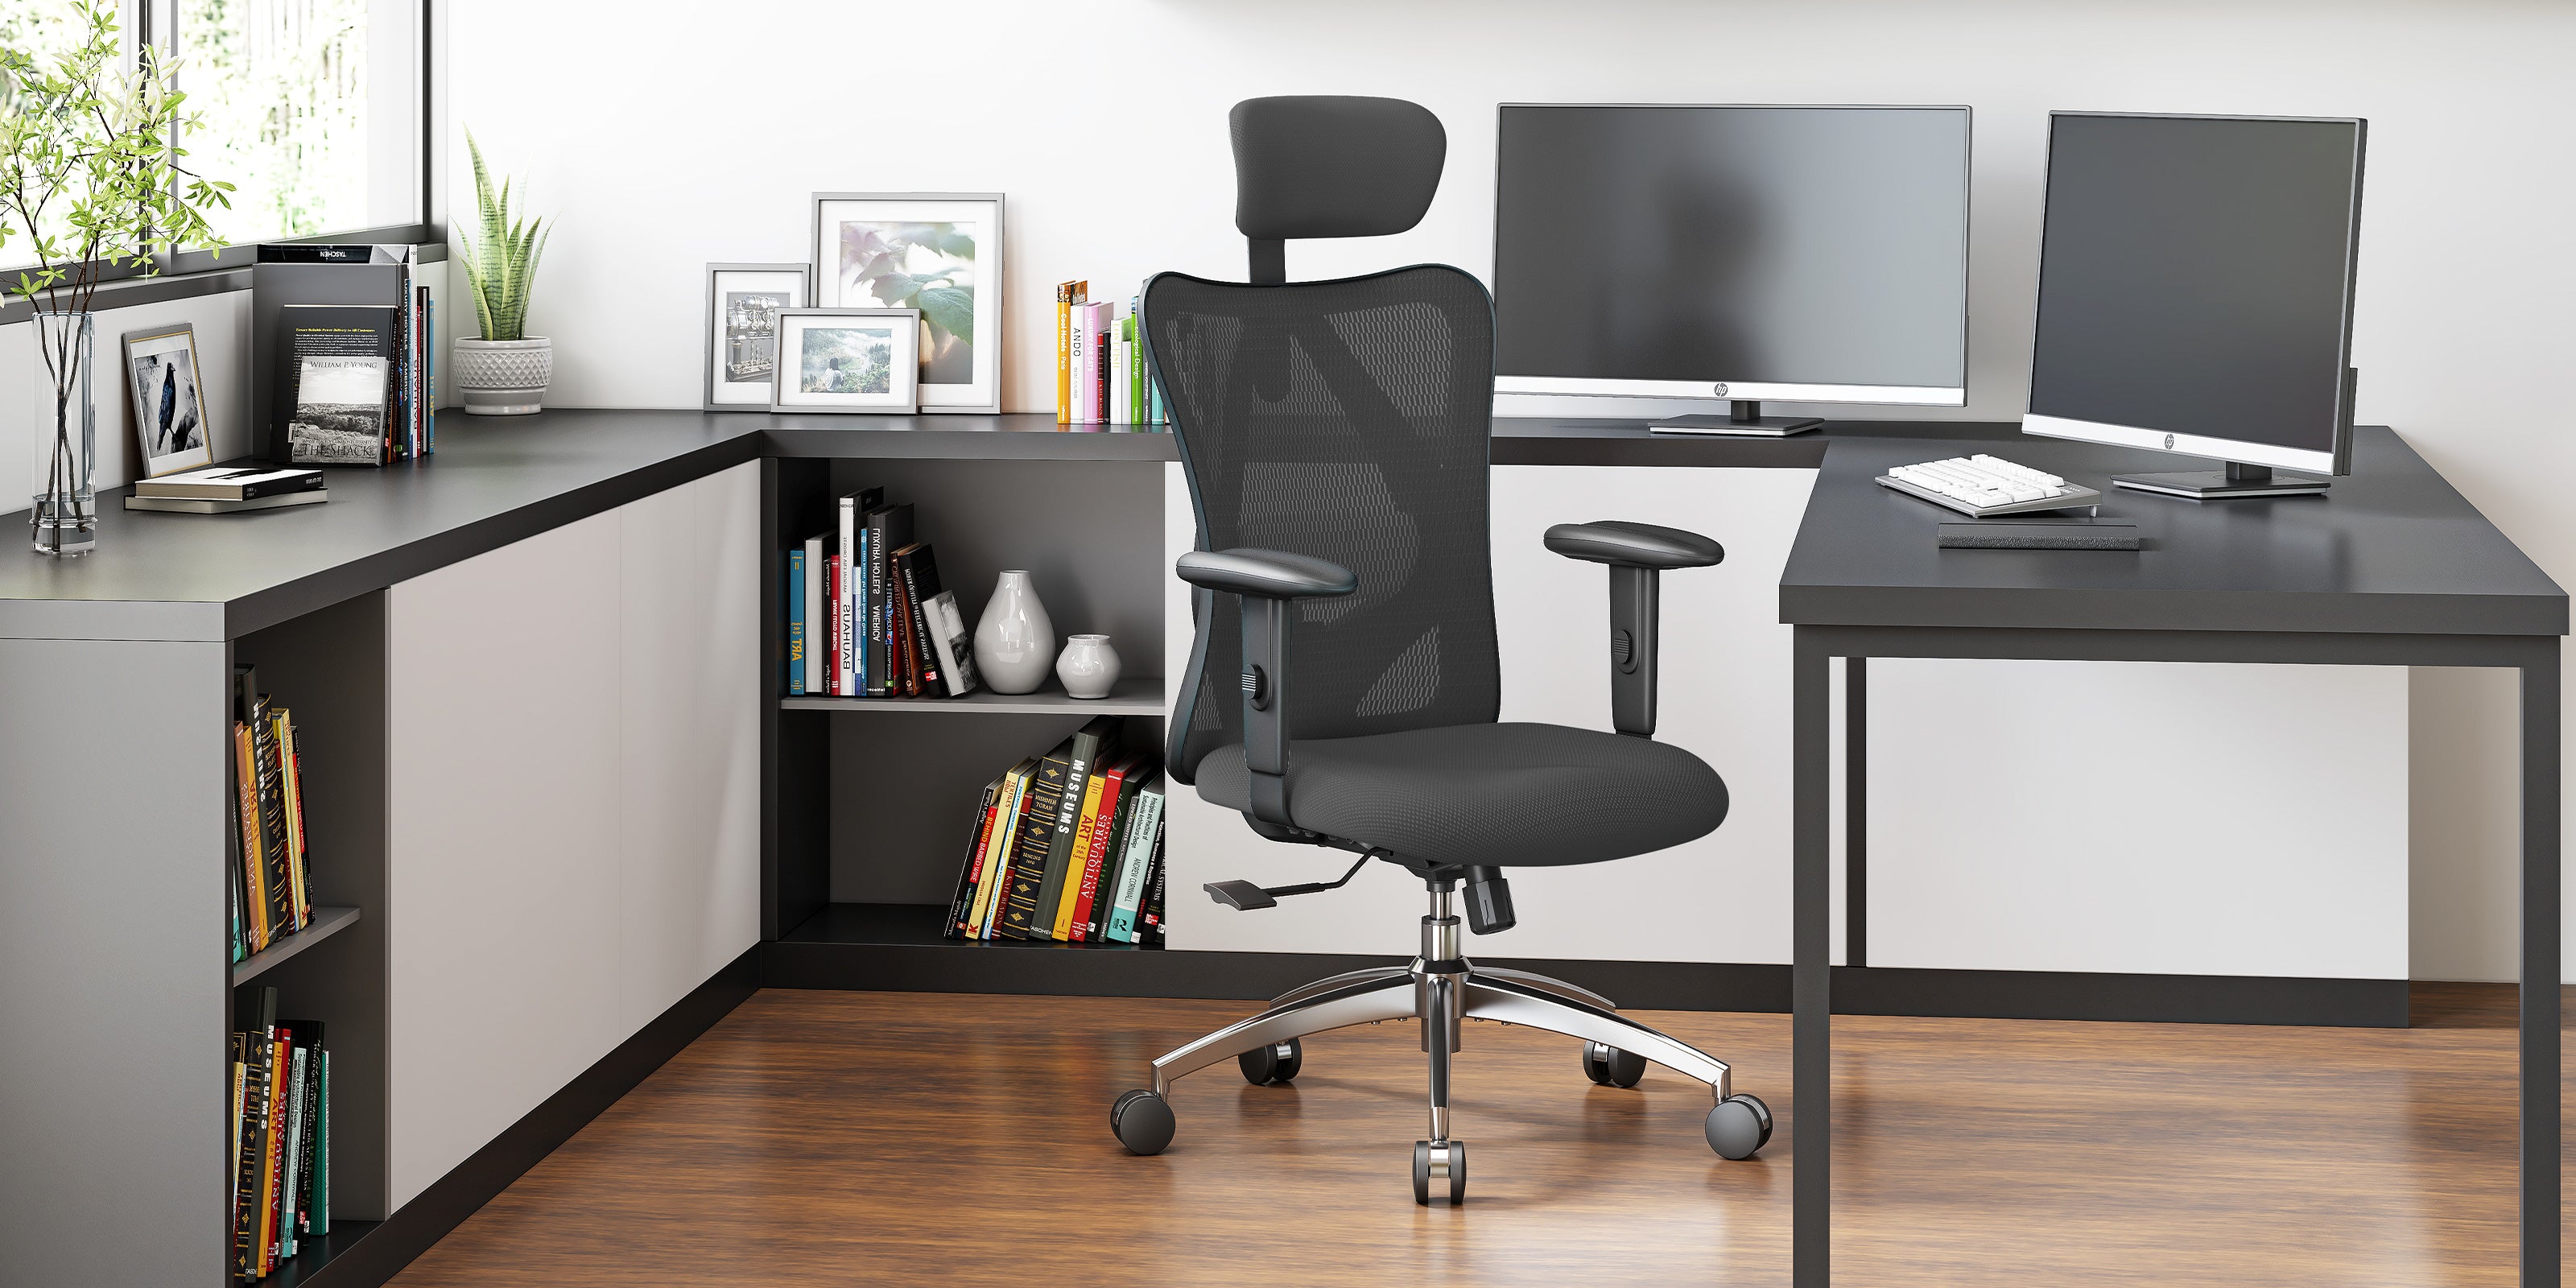 SIHOO M18 Office Chair - Expert Review UK